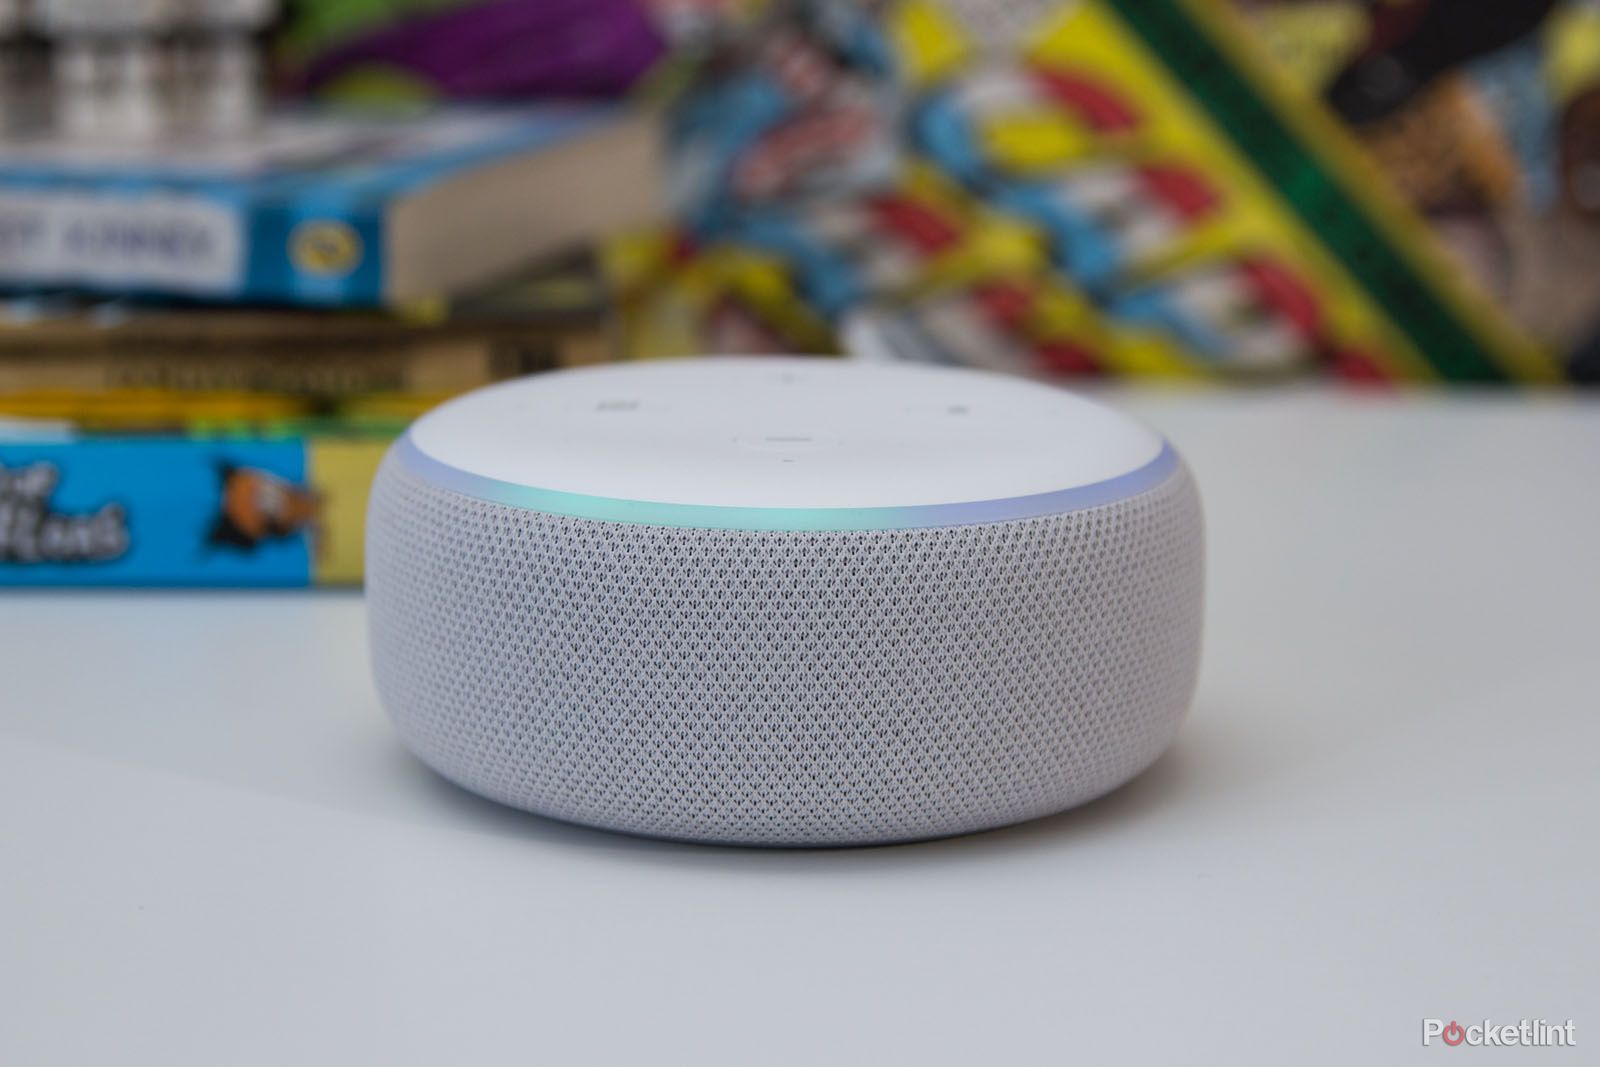 Get an Amazon Echo Dot for 99p with Amazon Music Unlimited image 1